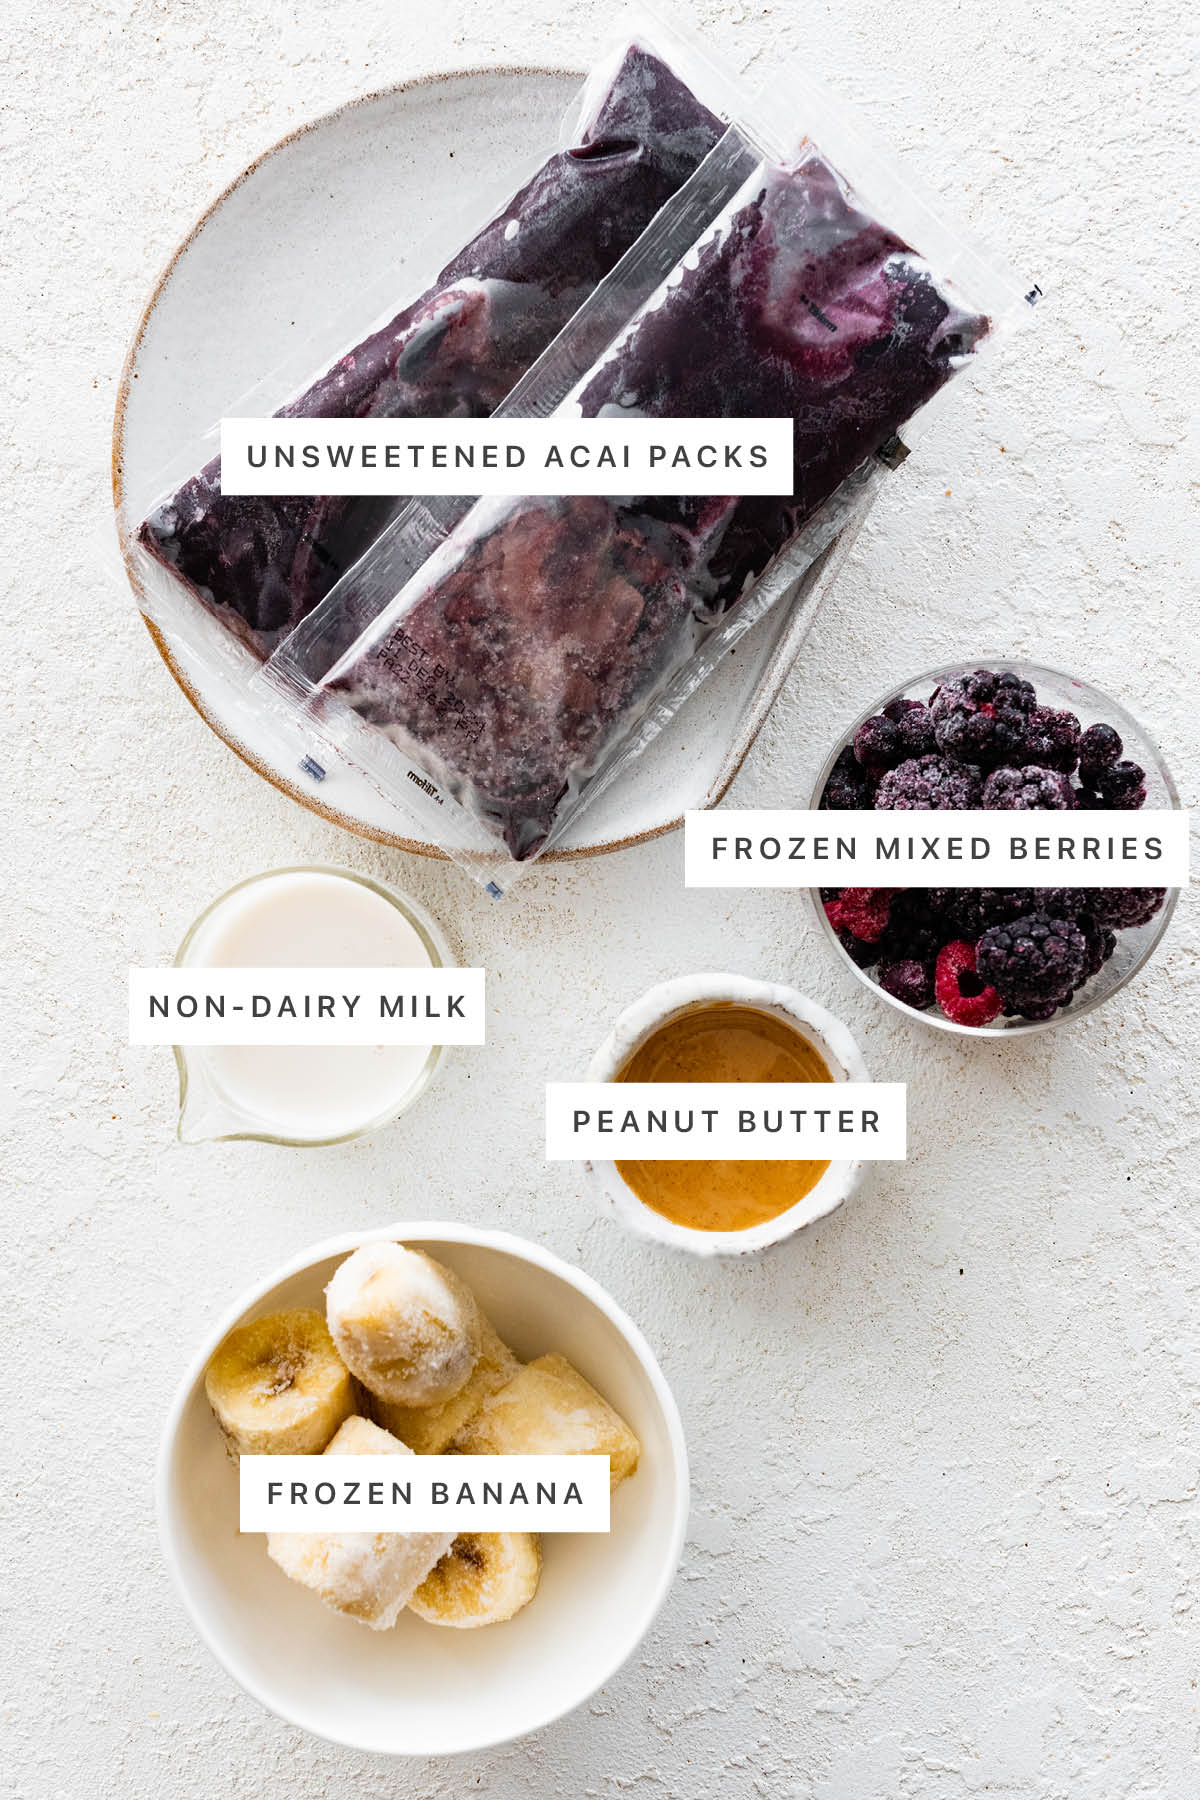 Ingredients measured out to make an acai bowl: unsweetened acai packs, frozen mixed berries, non-dairy milk, peanut butter, frozen banana.